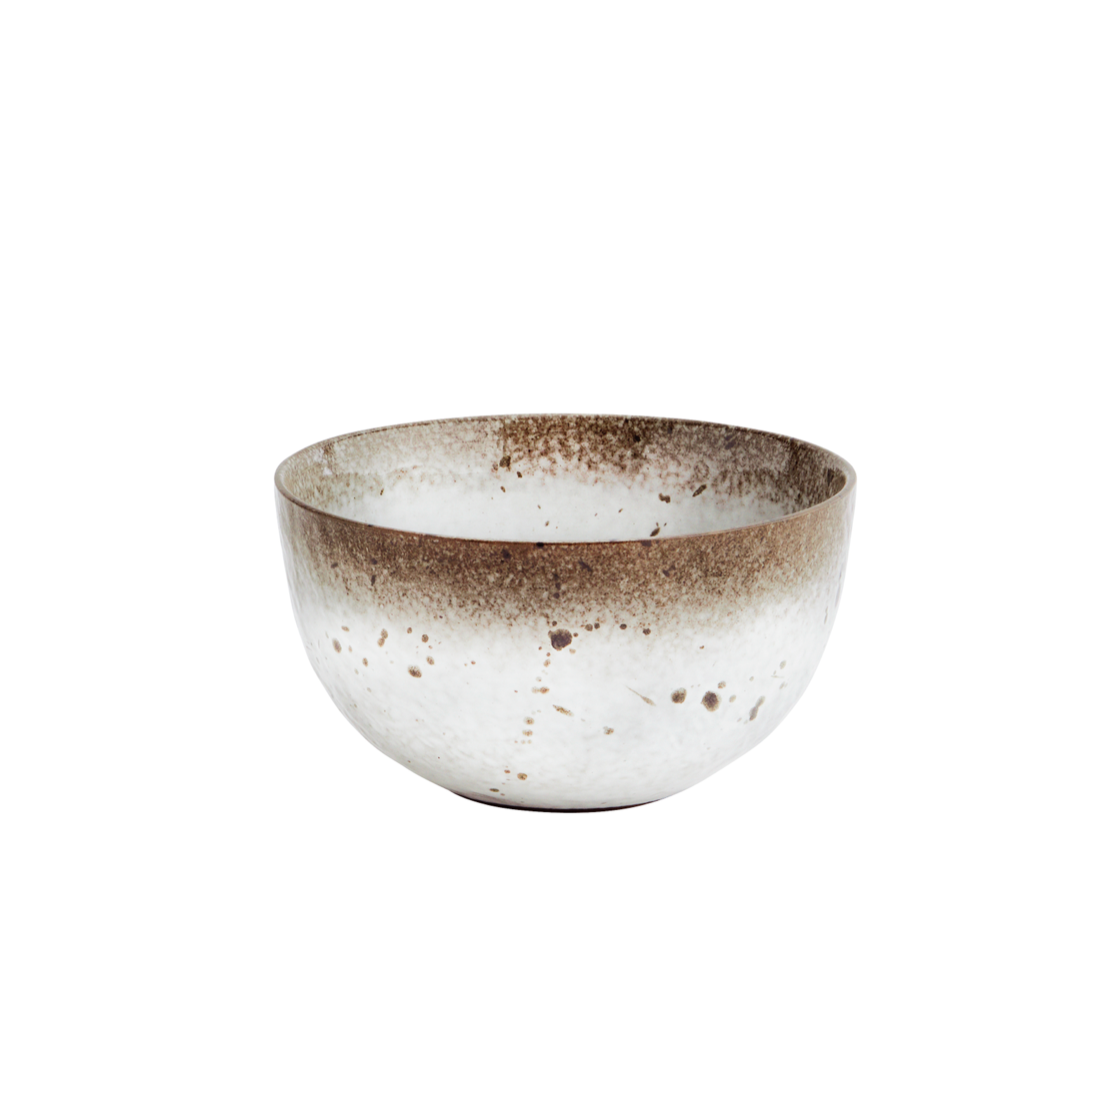 white stoneware bowl with brown speckles and rim